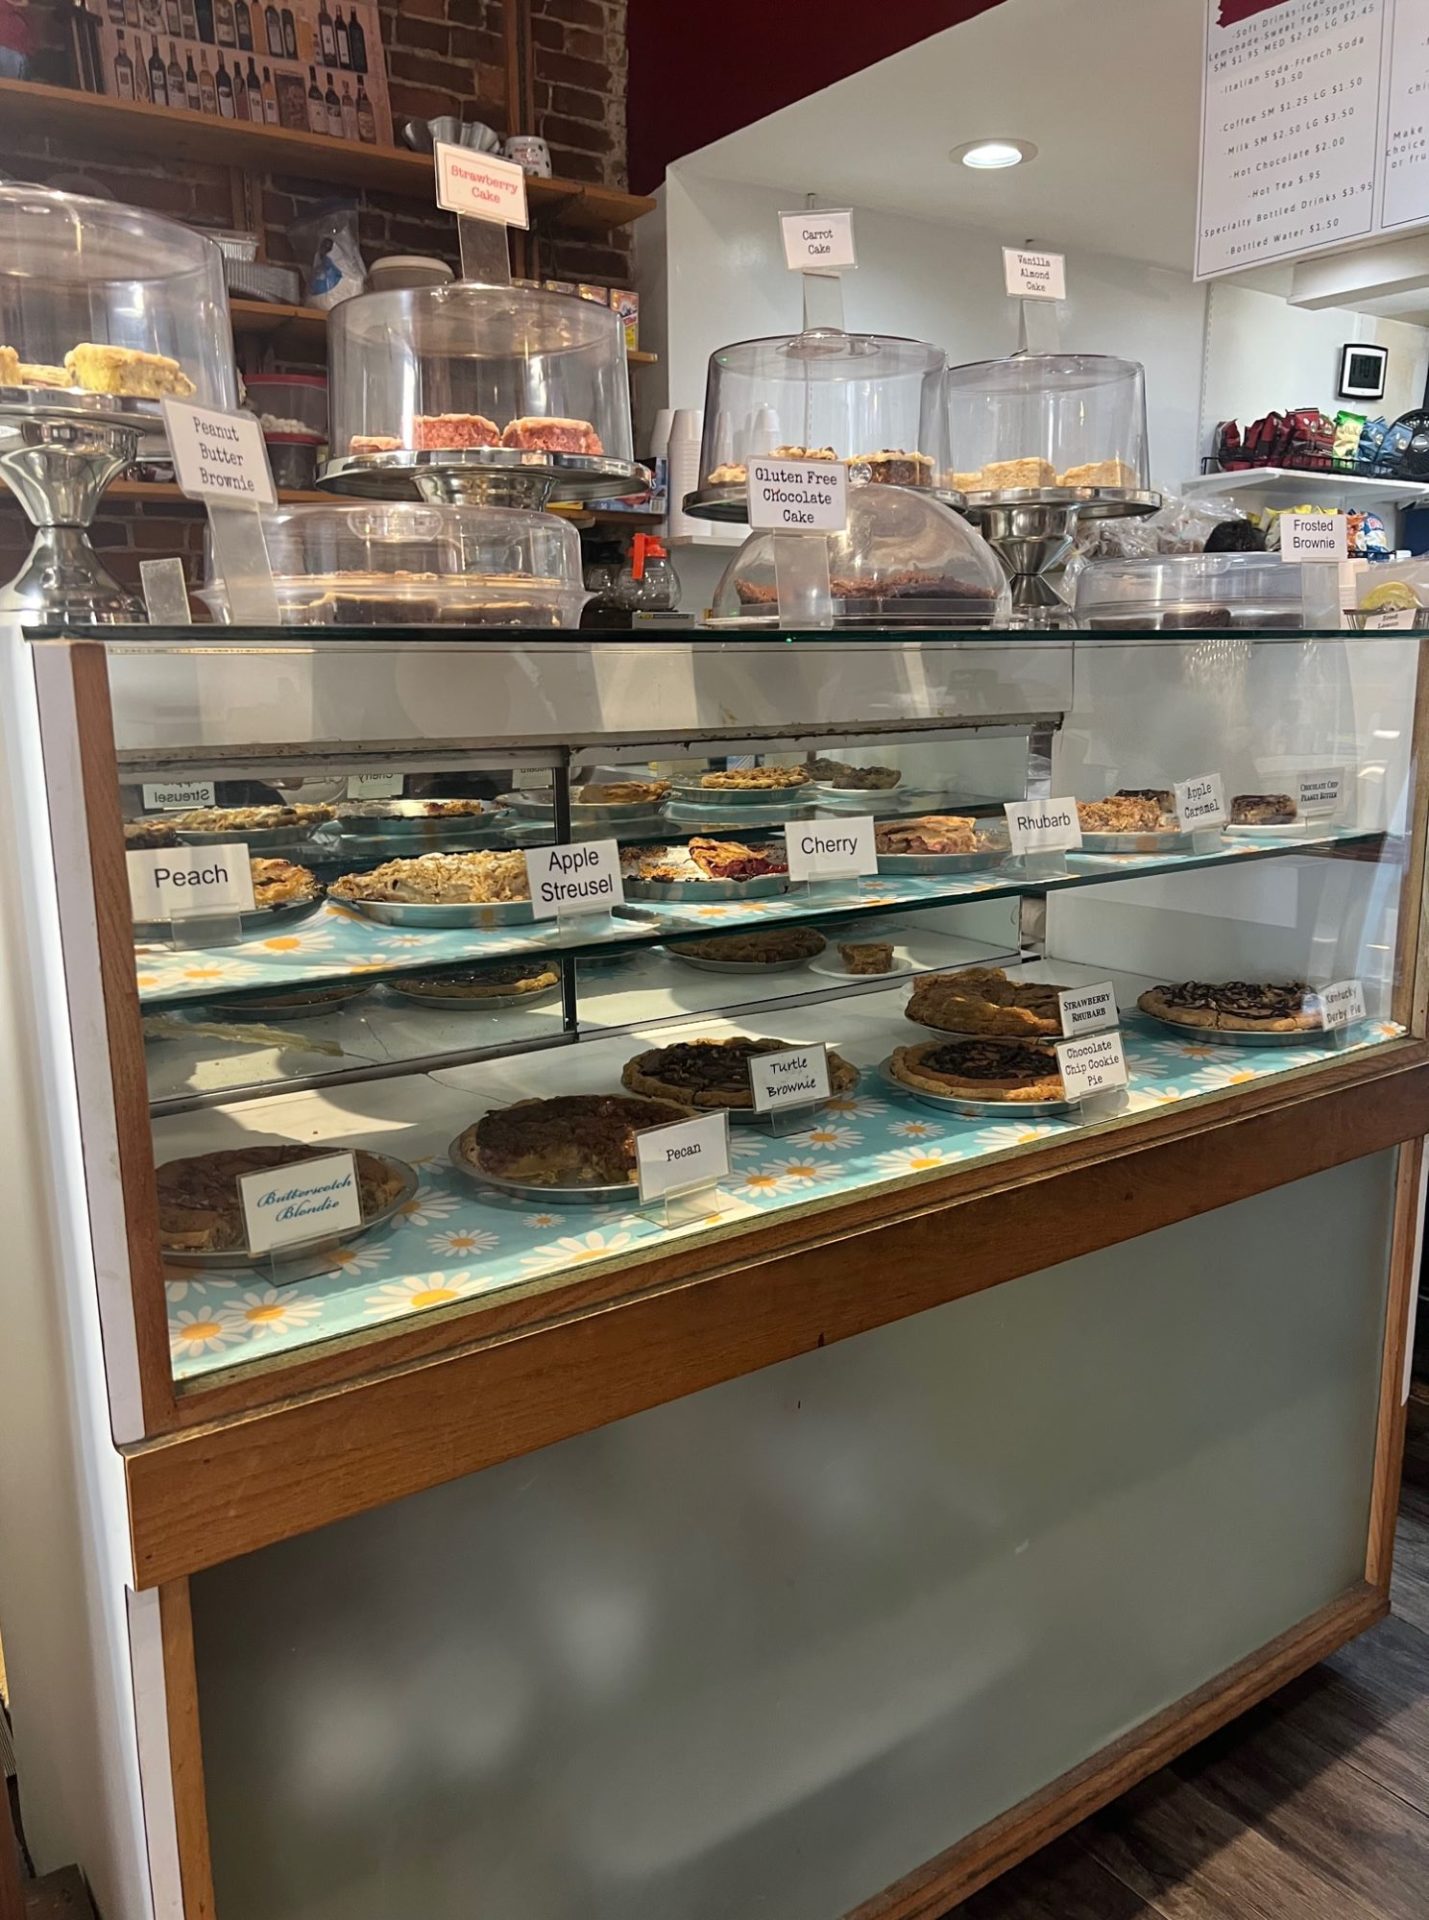 A bakery case with two interior shelves filled with pies. The top of the case has several displays with other desserts encased in them.